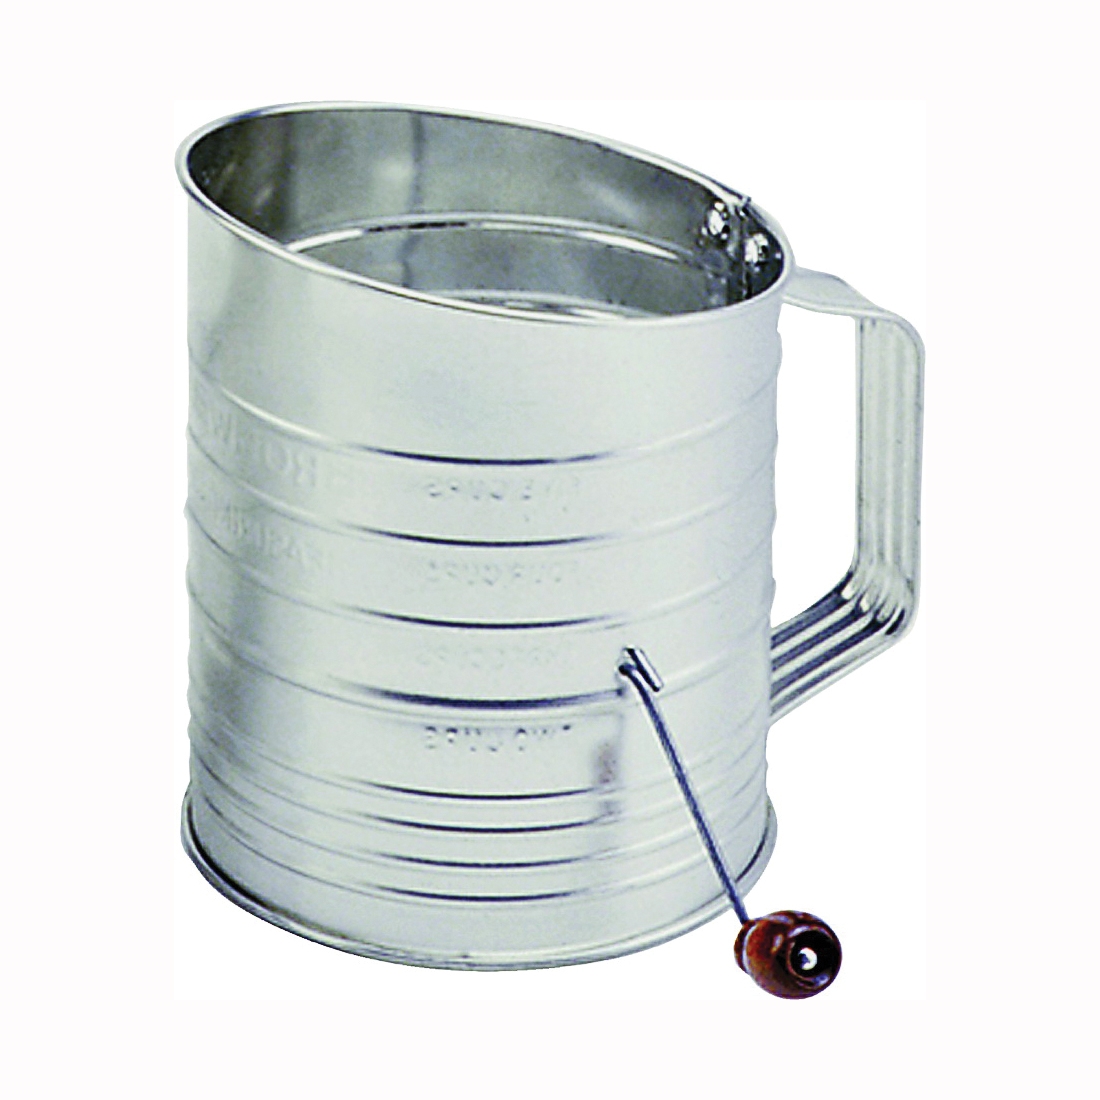 137 Hand Crank Sifter, 40 oz Capacity, 5 in H, Stainless Steel